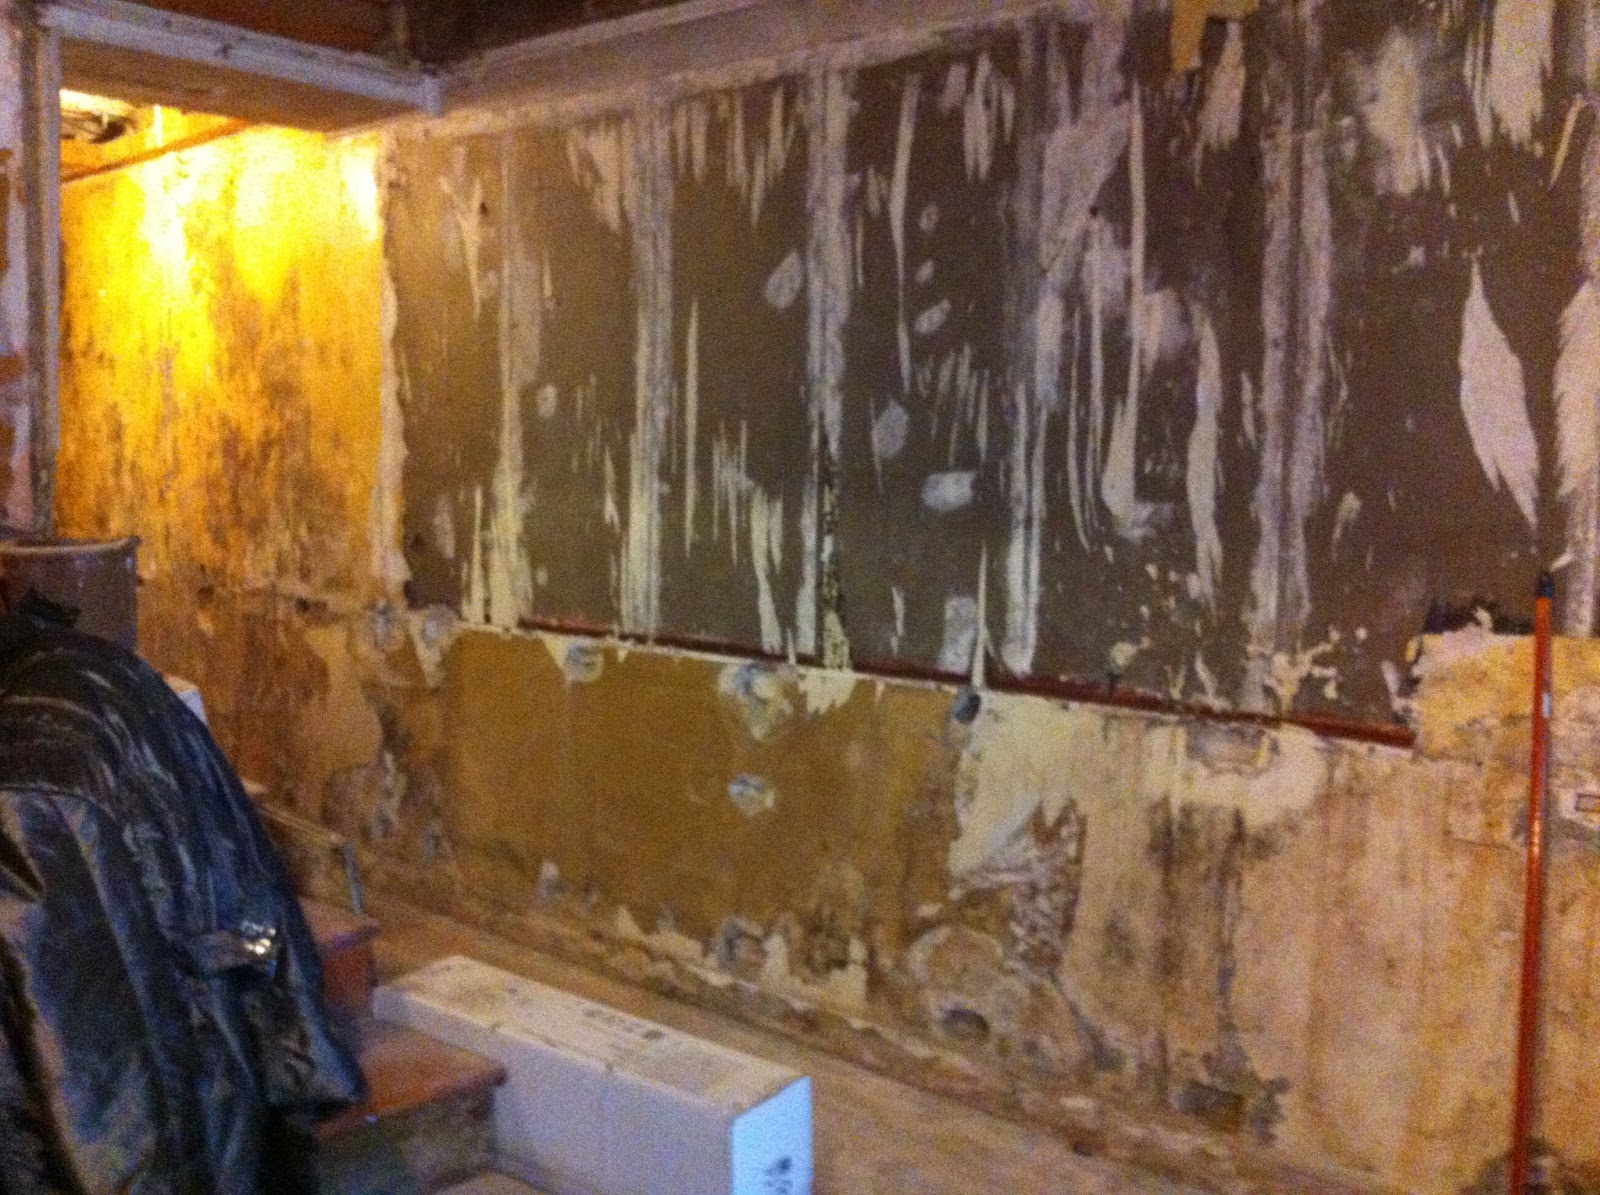 Renovation Project - how to strip wallpaper from old walls